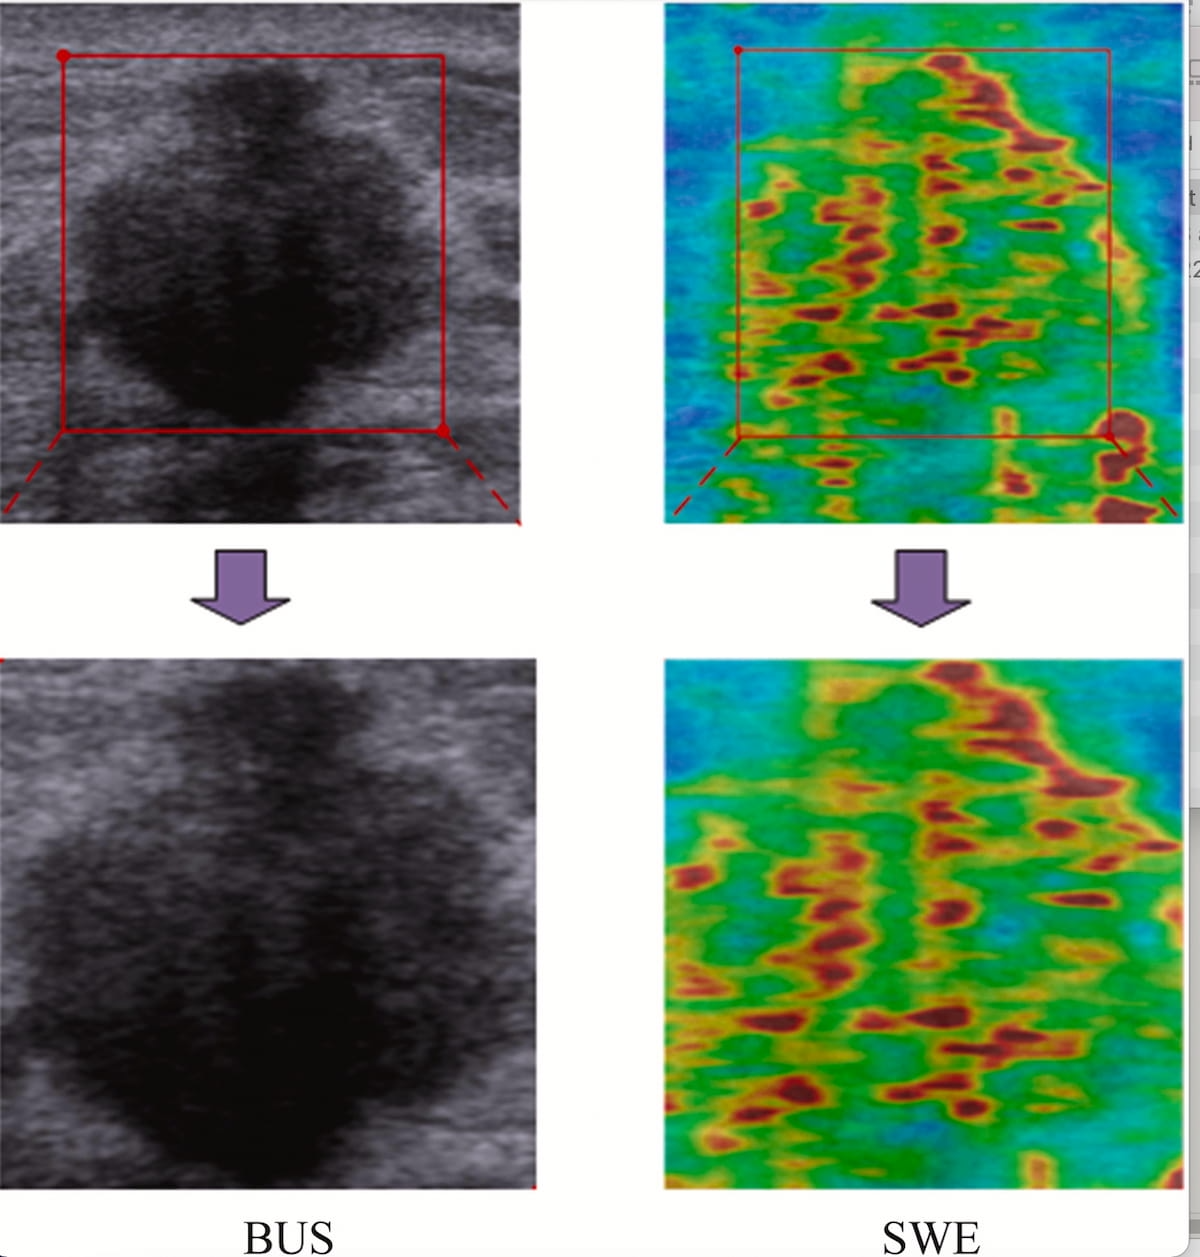 Can an AI Combination of Ultrasound and Molecular Data Predict Adjunctive Chemotherapy Response in Breast Cancer Patients?  